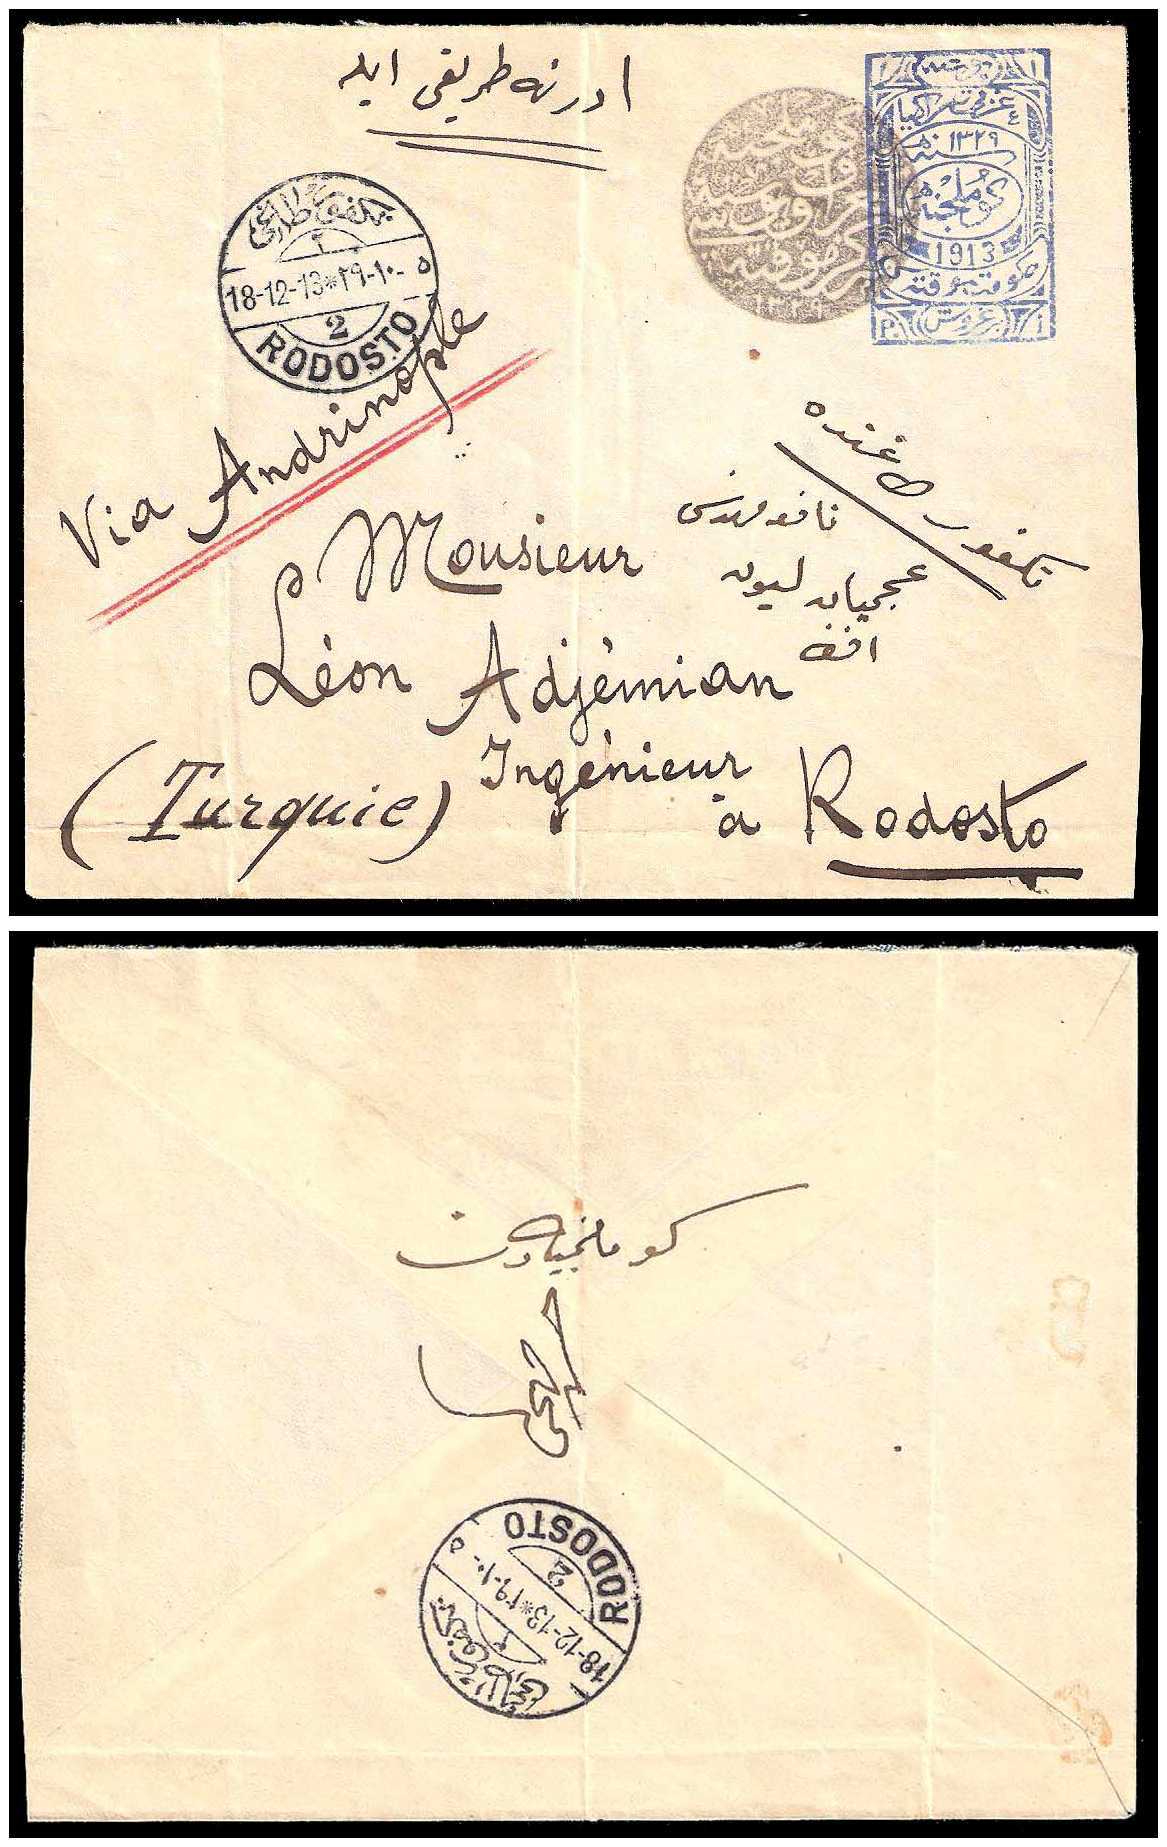 10.10.1913 Greece Thrace "Provisional" Government of Western Thrace Mi I/II cover 18.12.1913